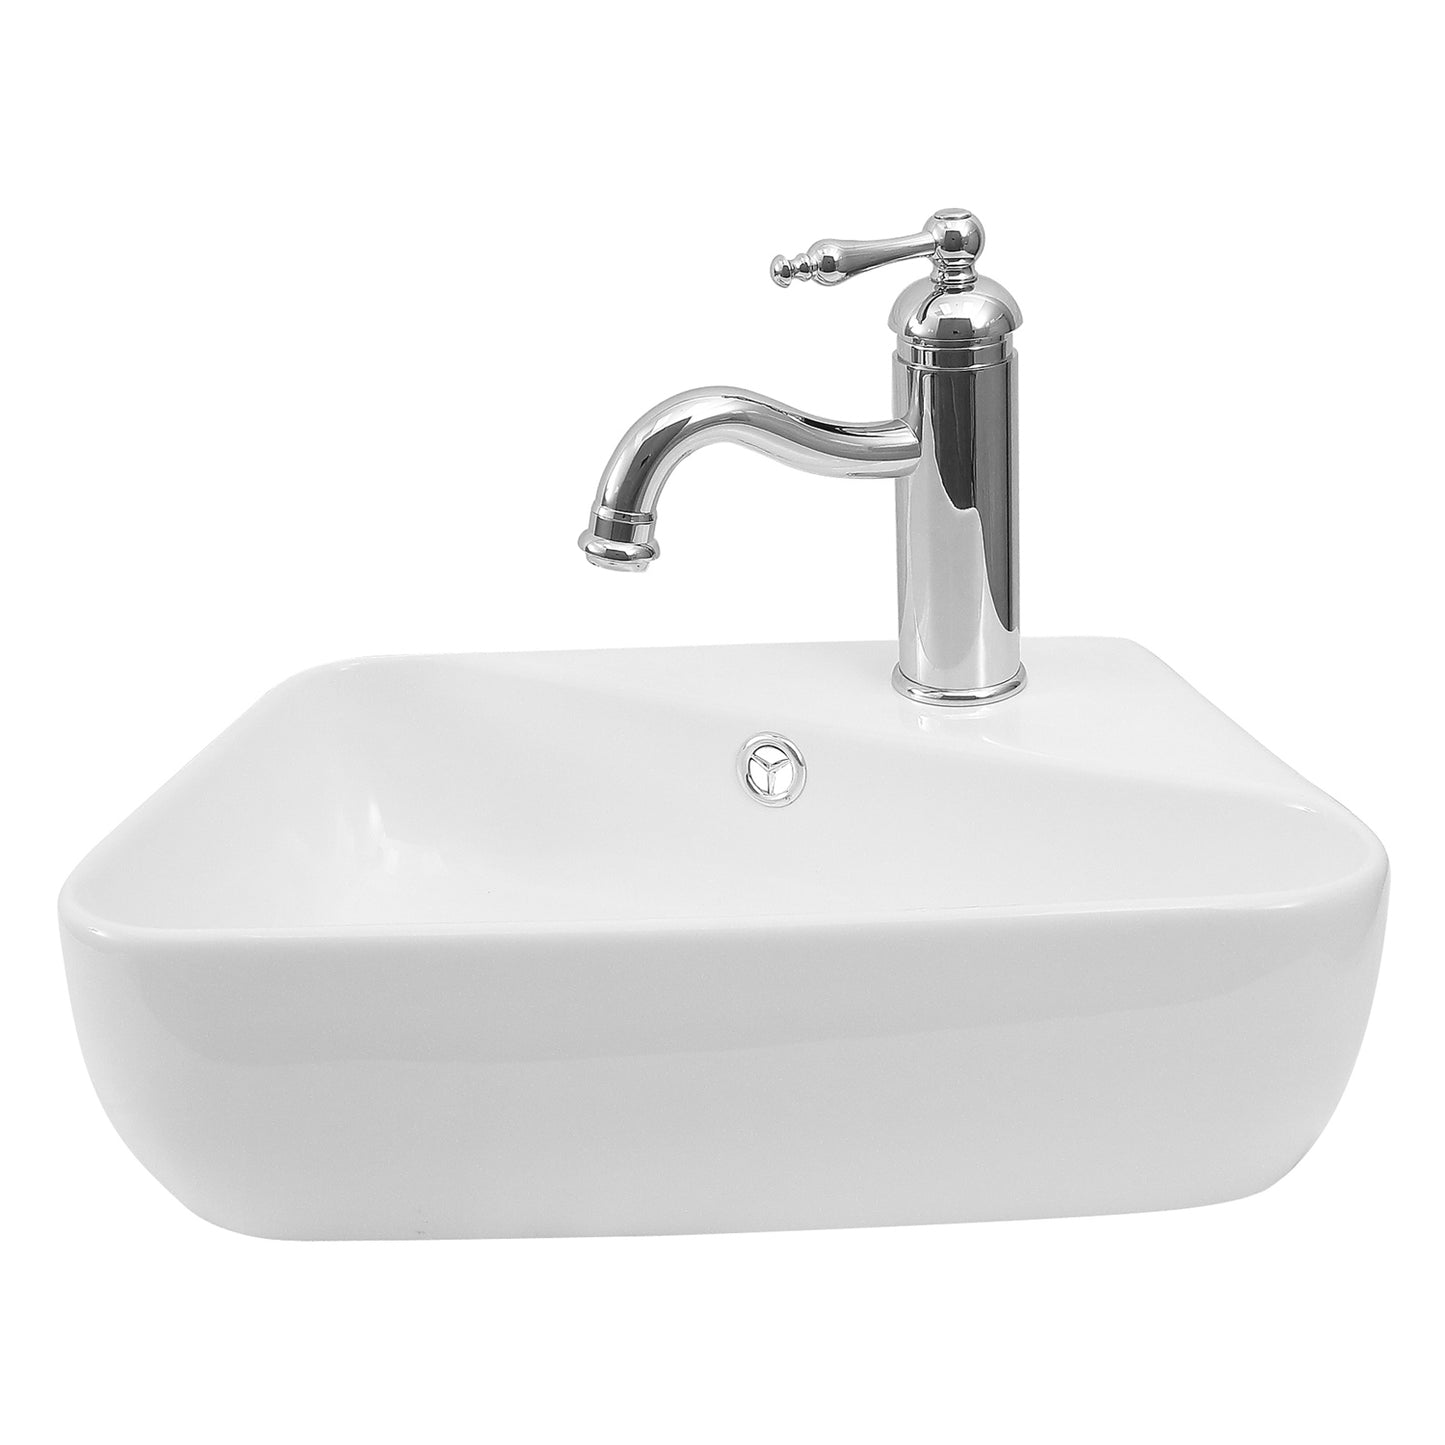 Nikki 17" Wall Hung Bathroom Sink White 1 Faucet Hole